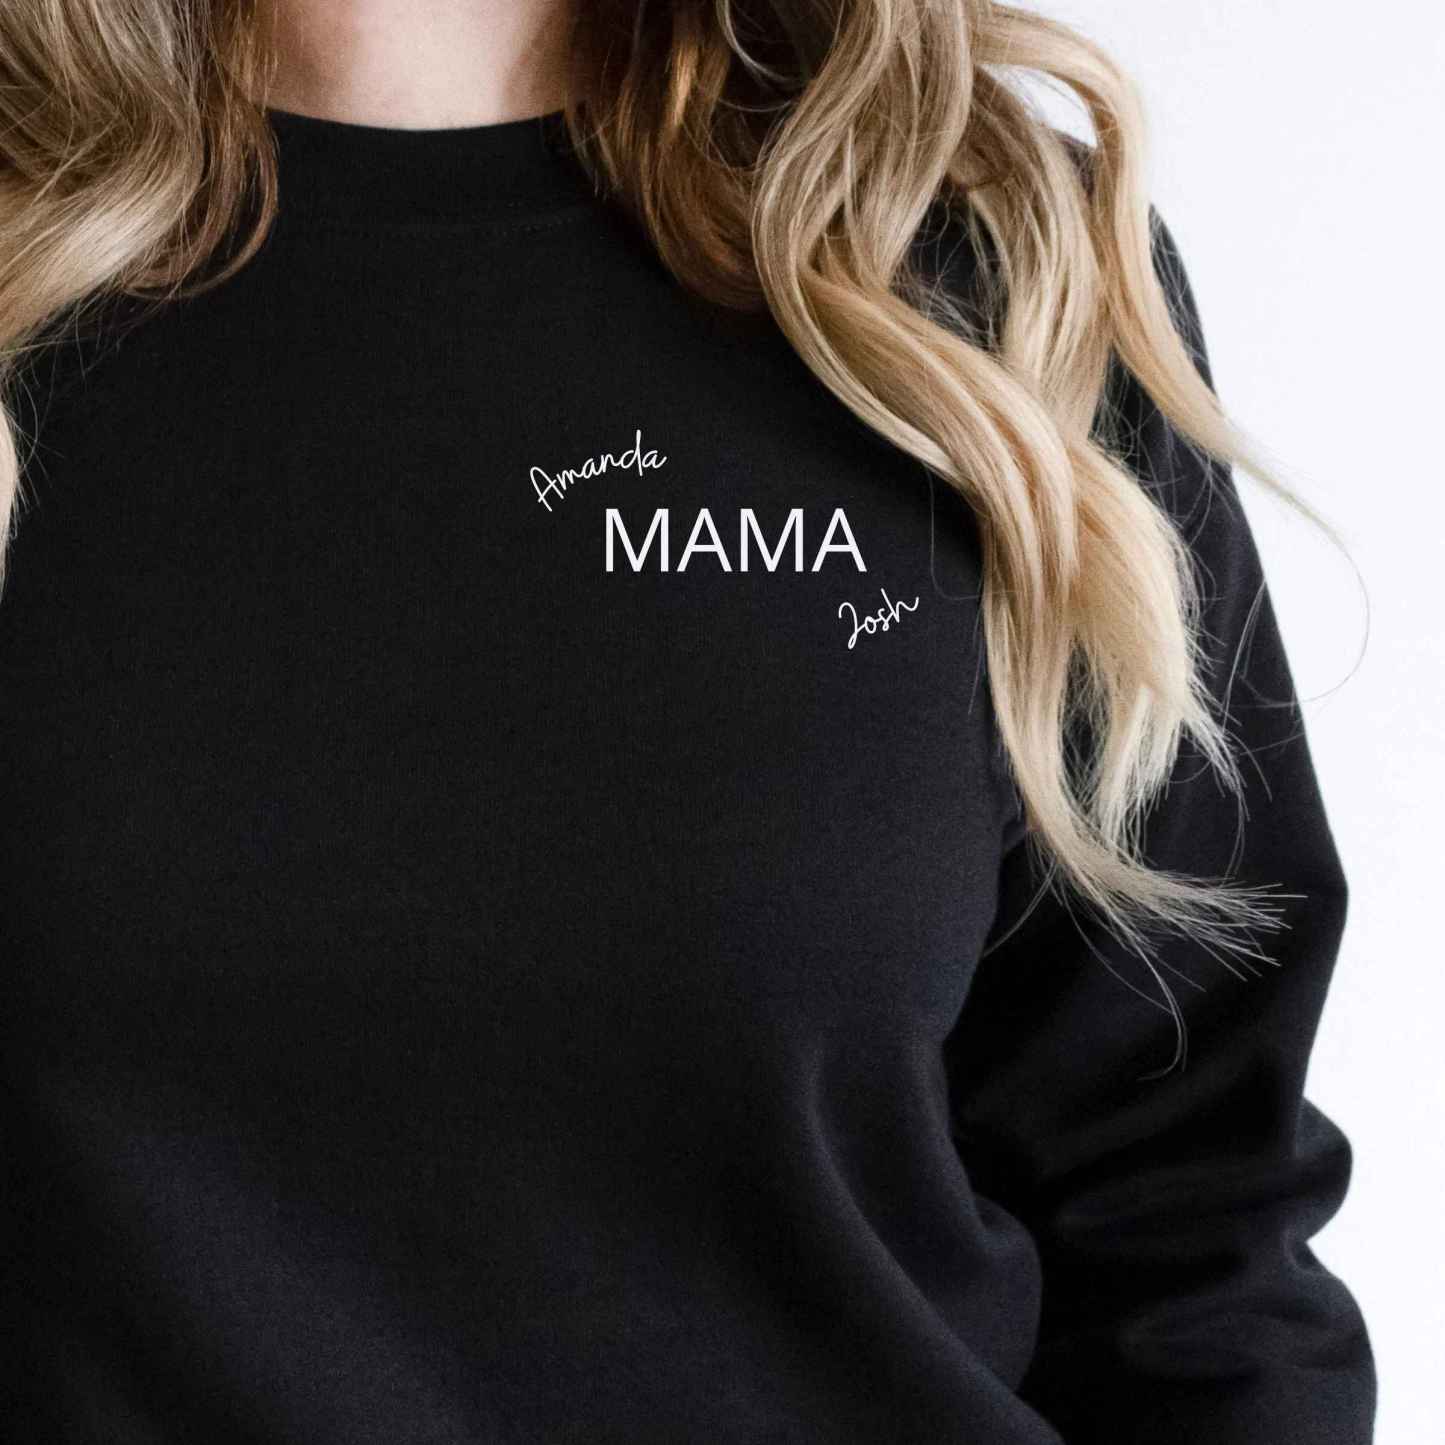 Mama Sweatshirt Personalized with Your Child's Name(s)! Kid's Names on Sweater Surrounding the Word MAMA Gift for Mom, Great New Mom Gift